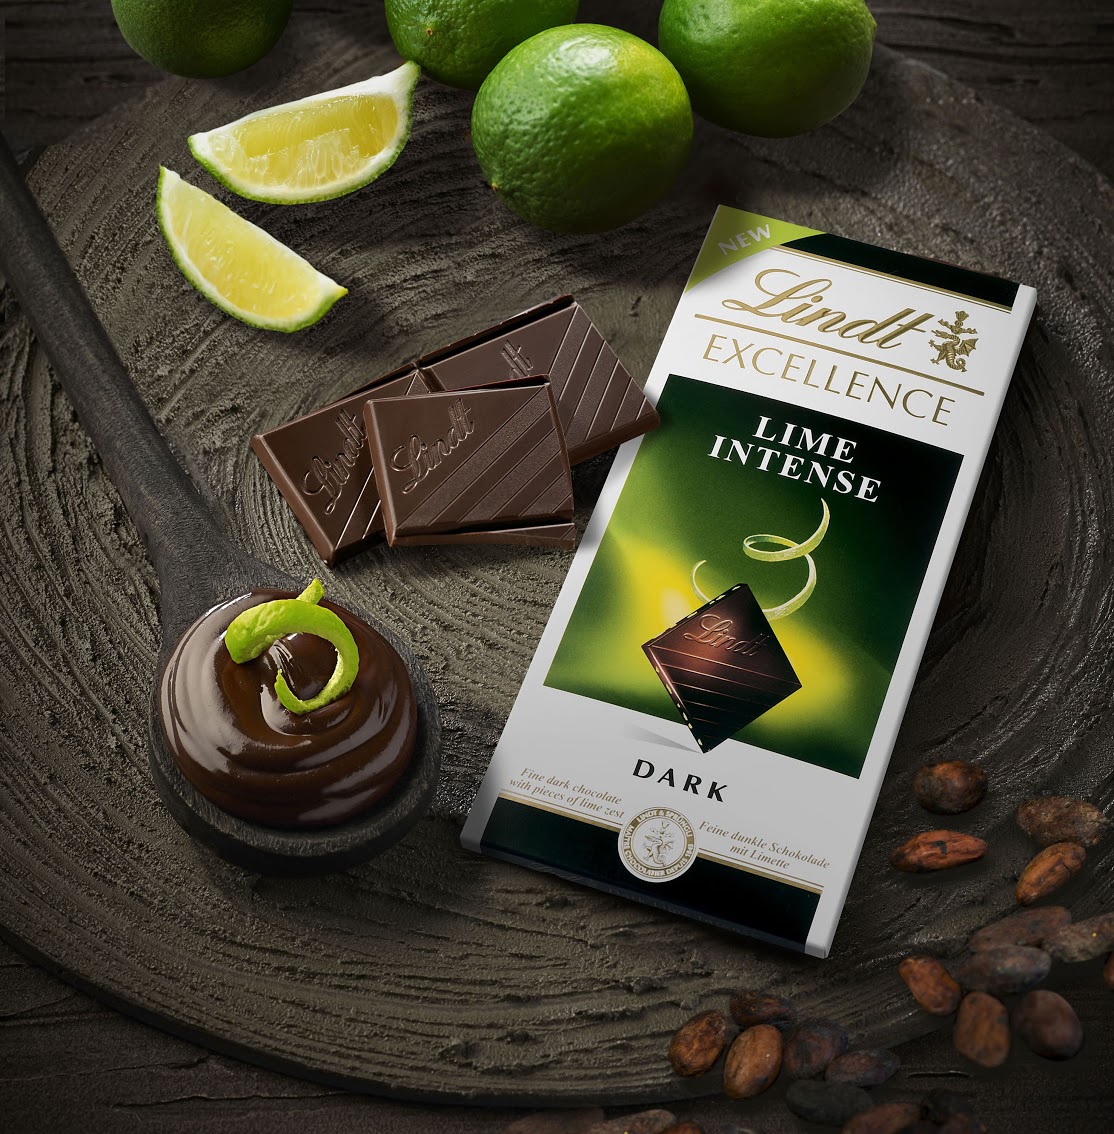 Новинка Lindt: Excellence Лайм